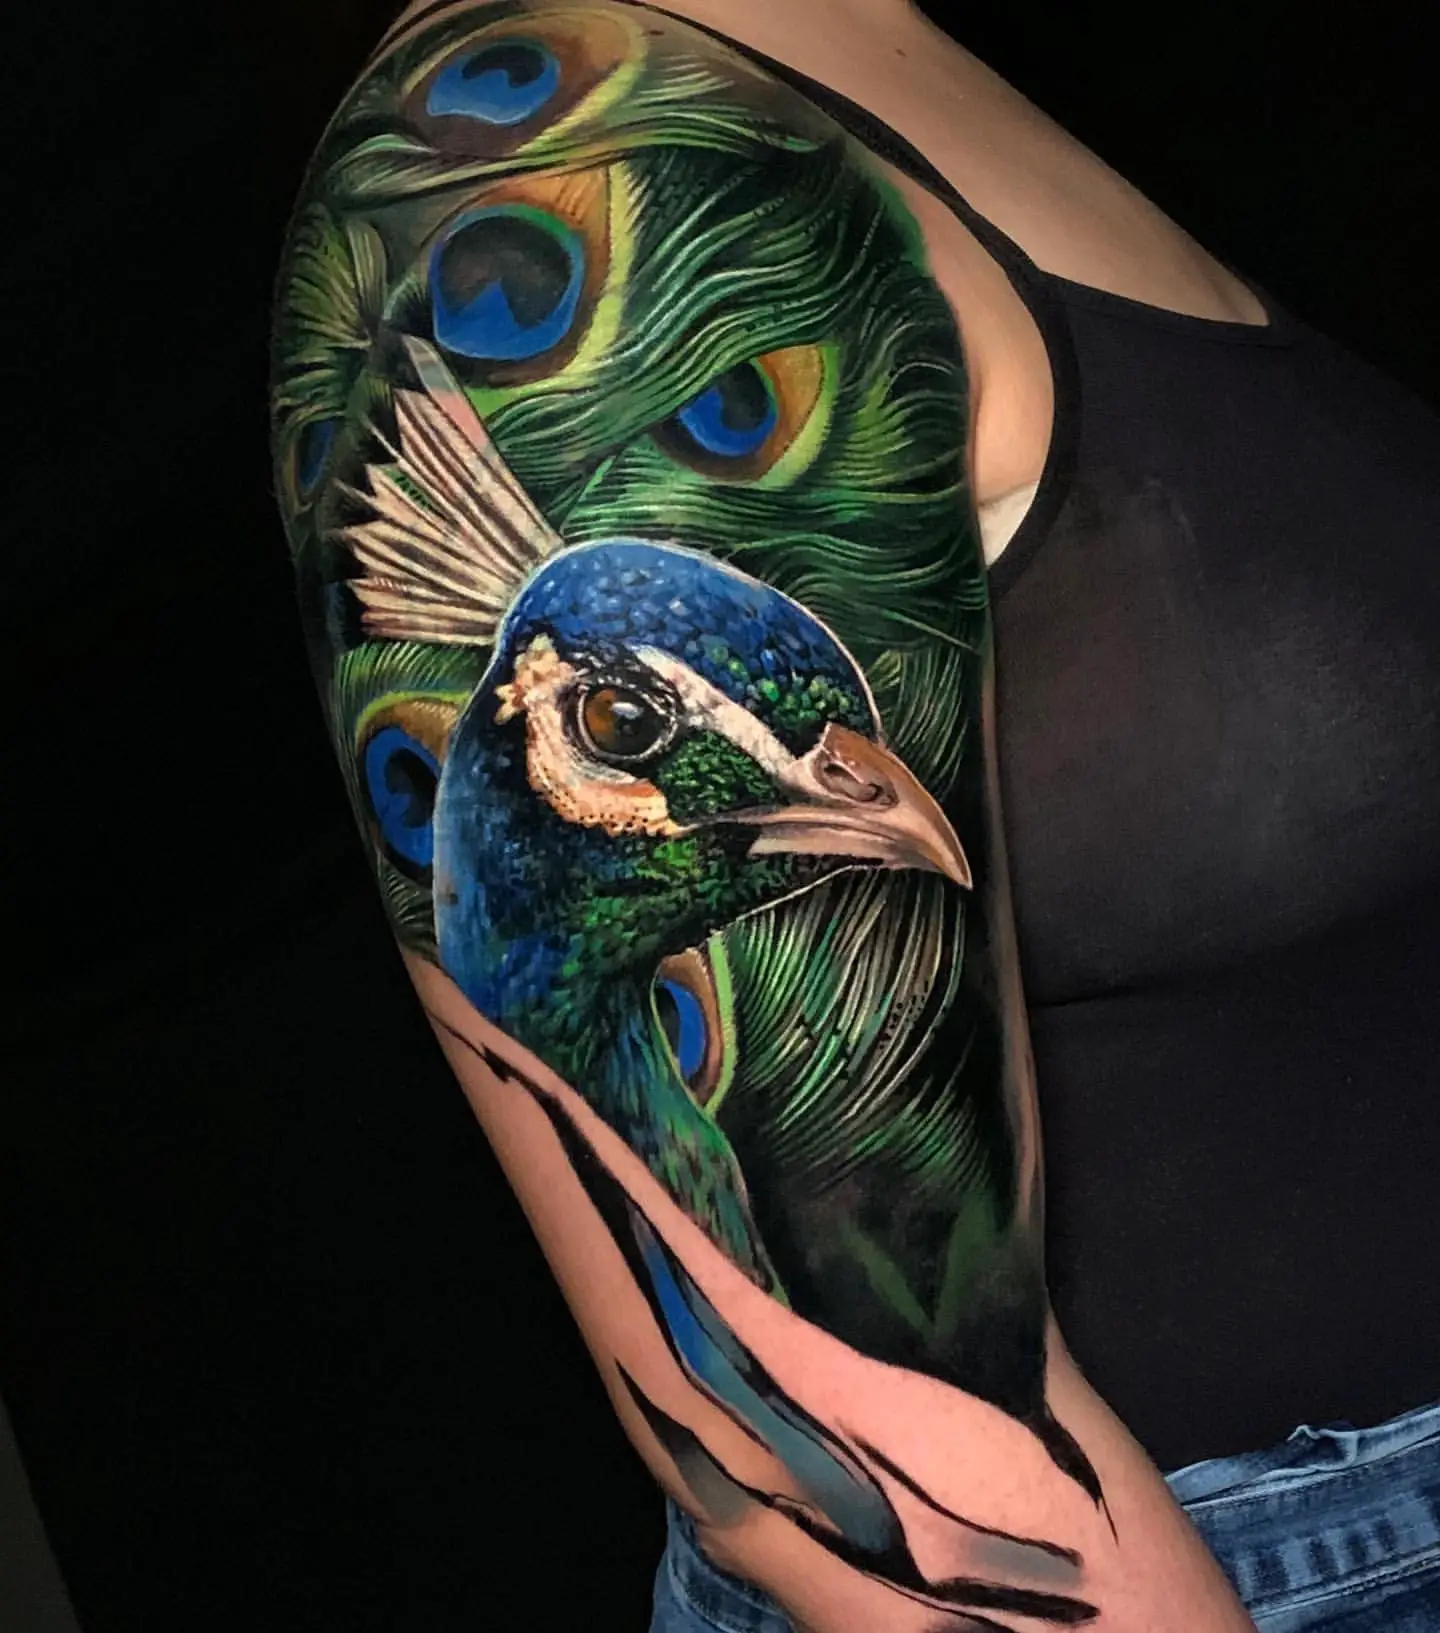 Peacock Tattoo Meaning: Interpreting the Symbolism Behind Your Ink